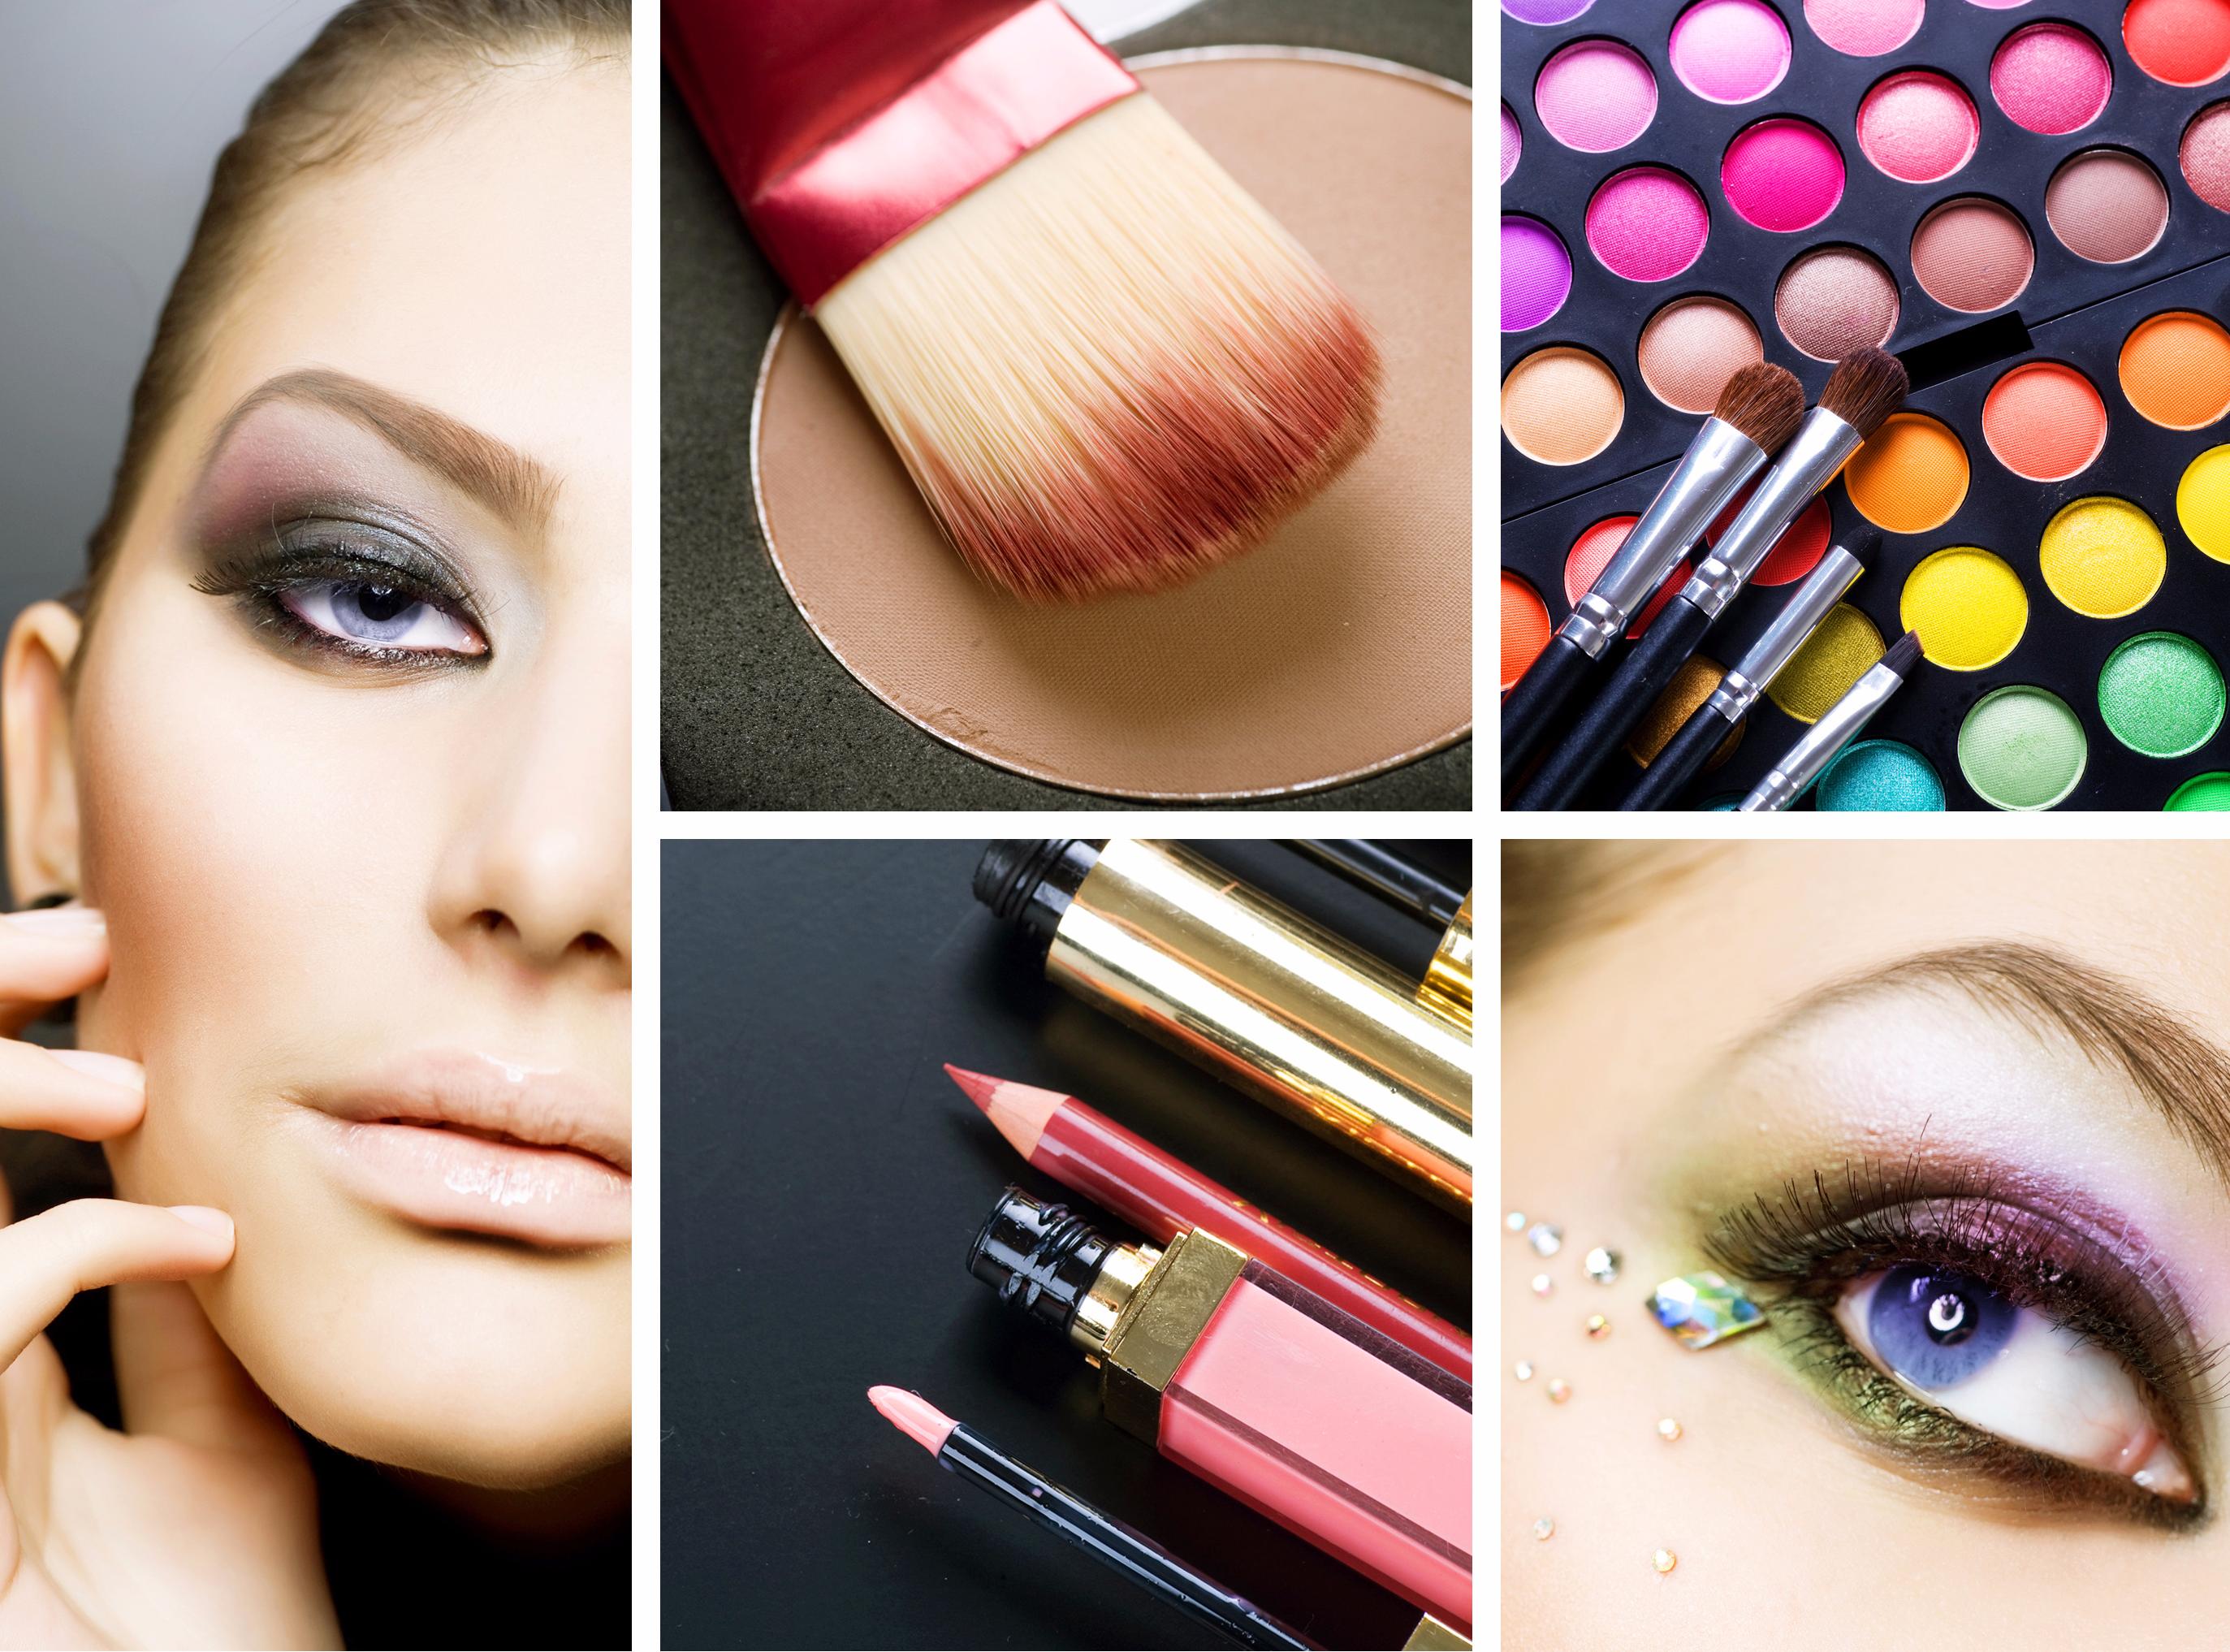 Beauty is in the details: Professional Make-up and Make-up for Your Confidence!